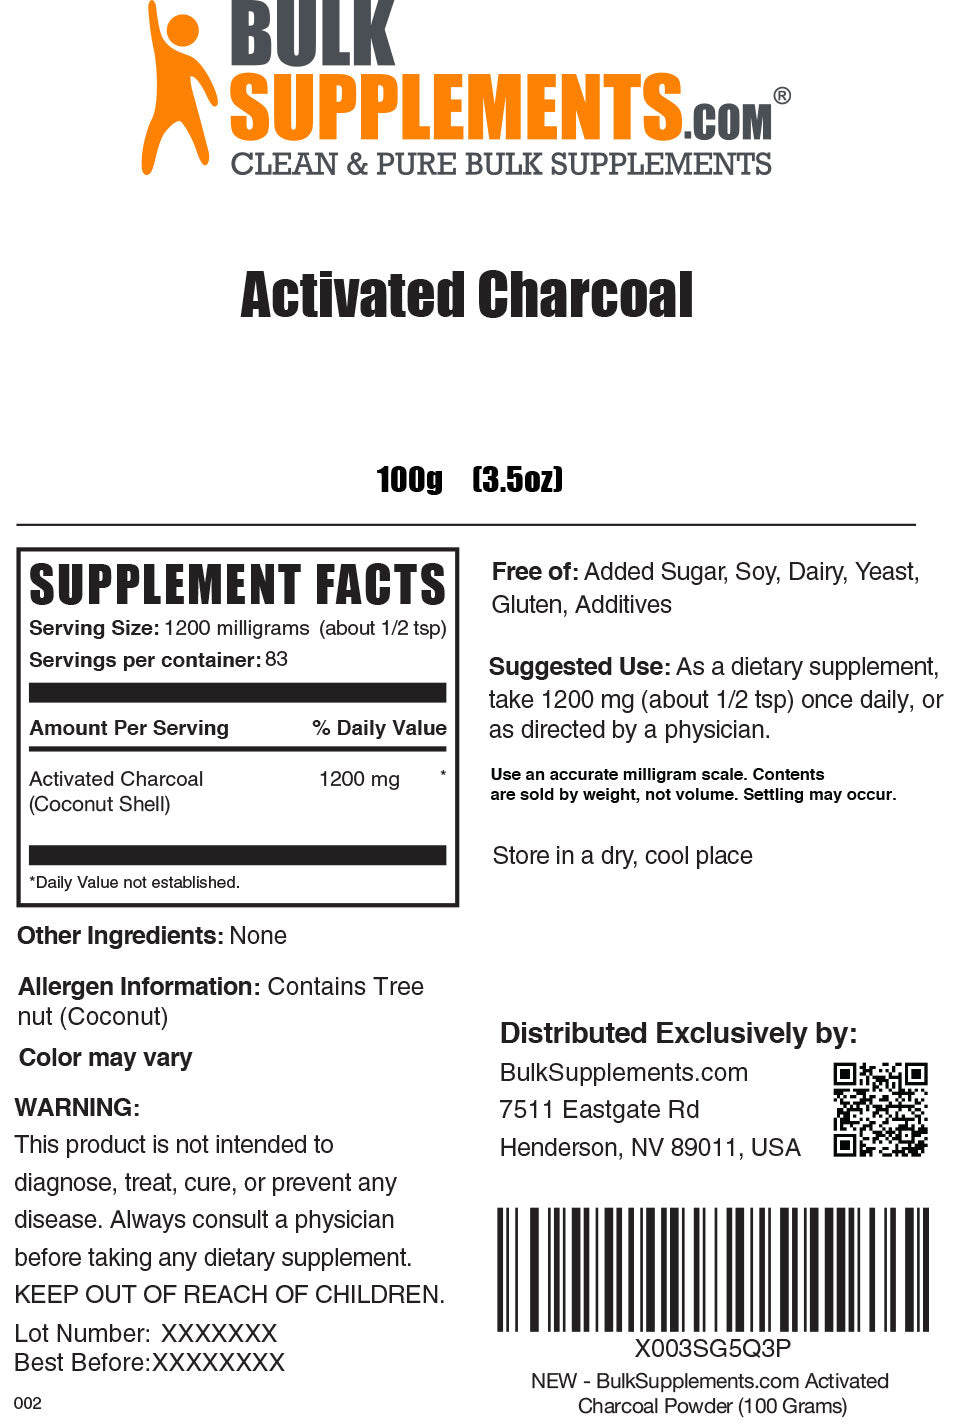 Activated Charcoal supplement facts